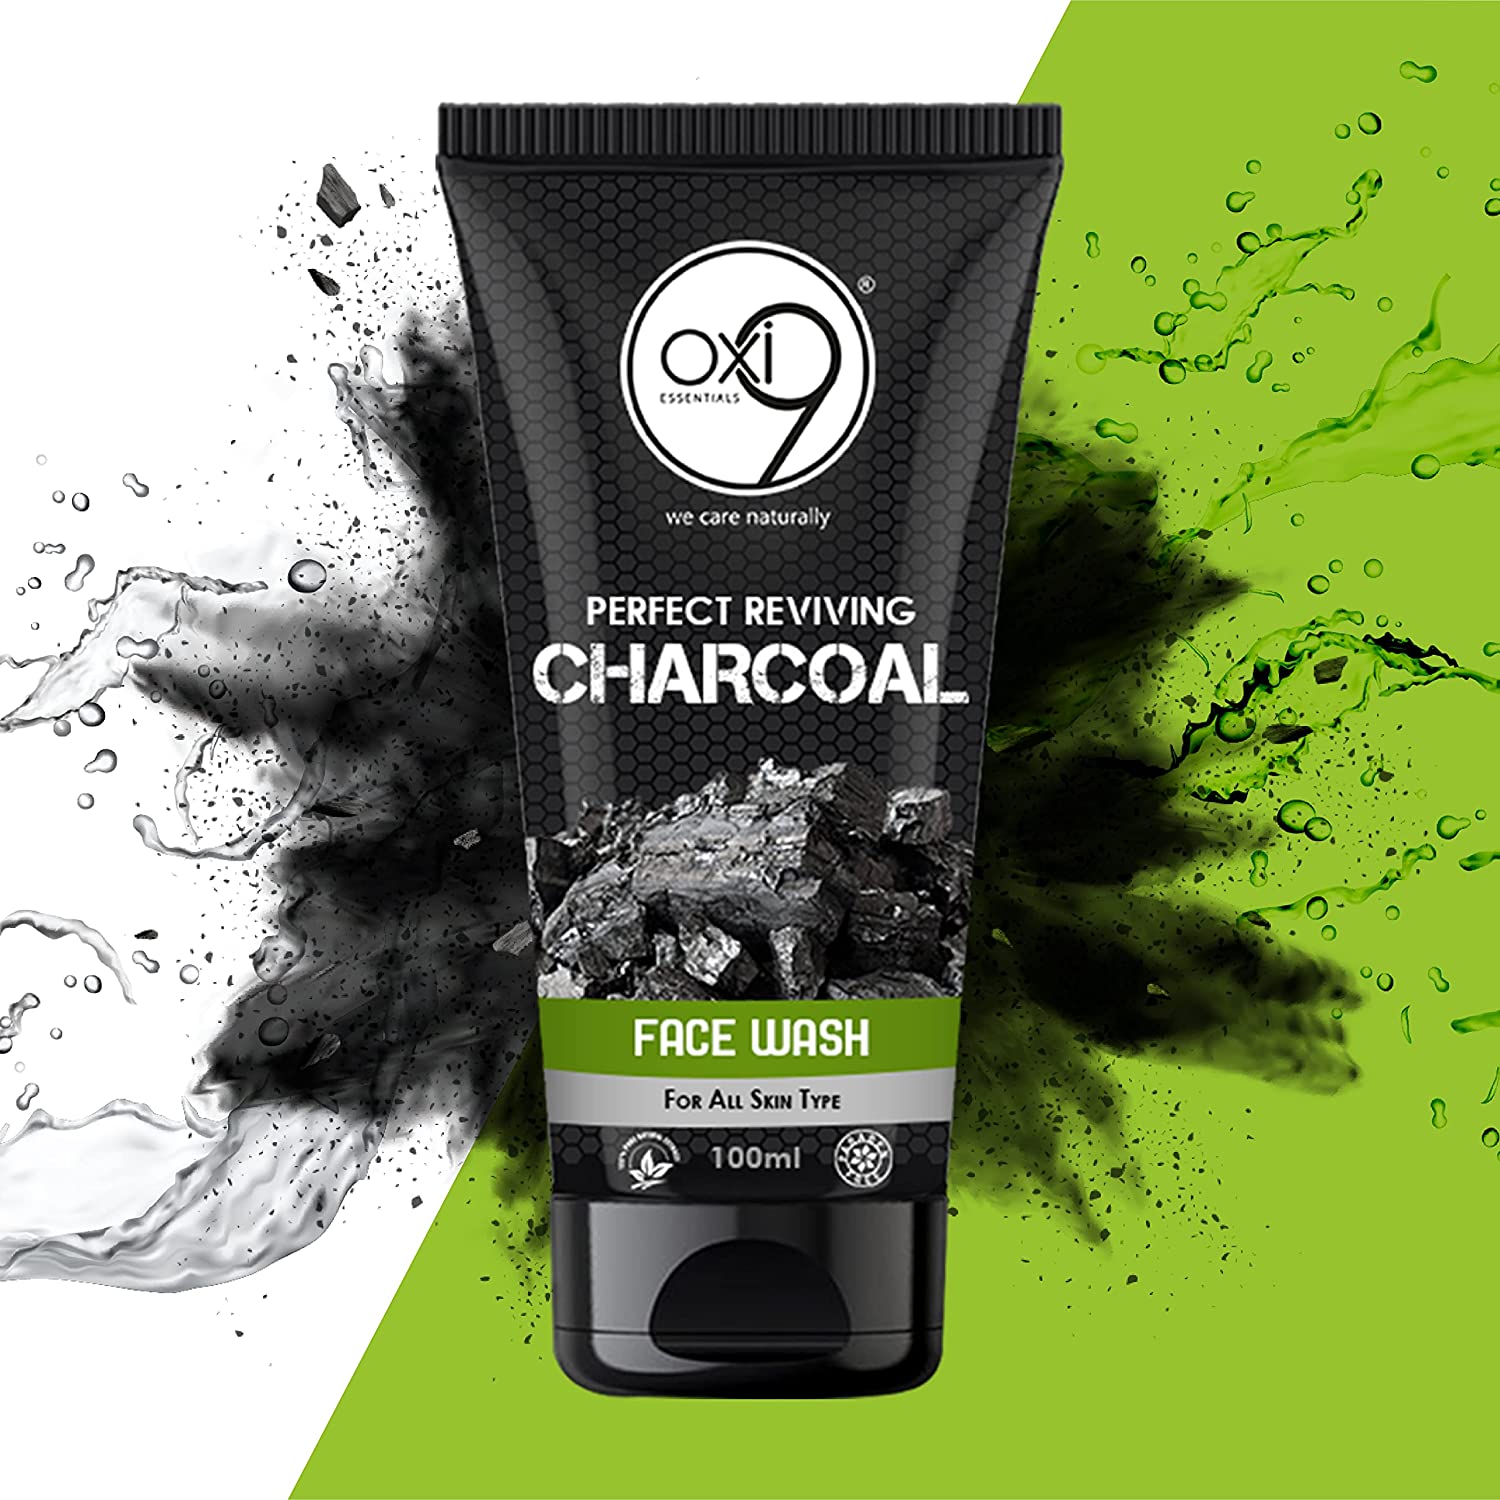 Perfect Reviving Charcoal Face Wash - 100ml | Paraben & Sulphate Free 